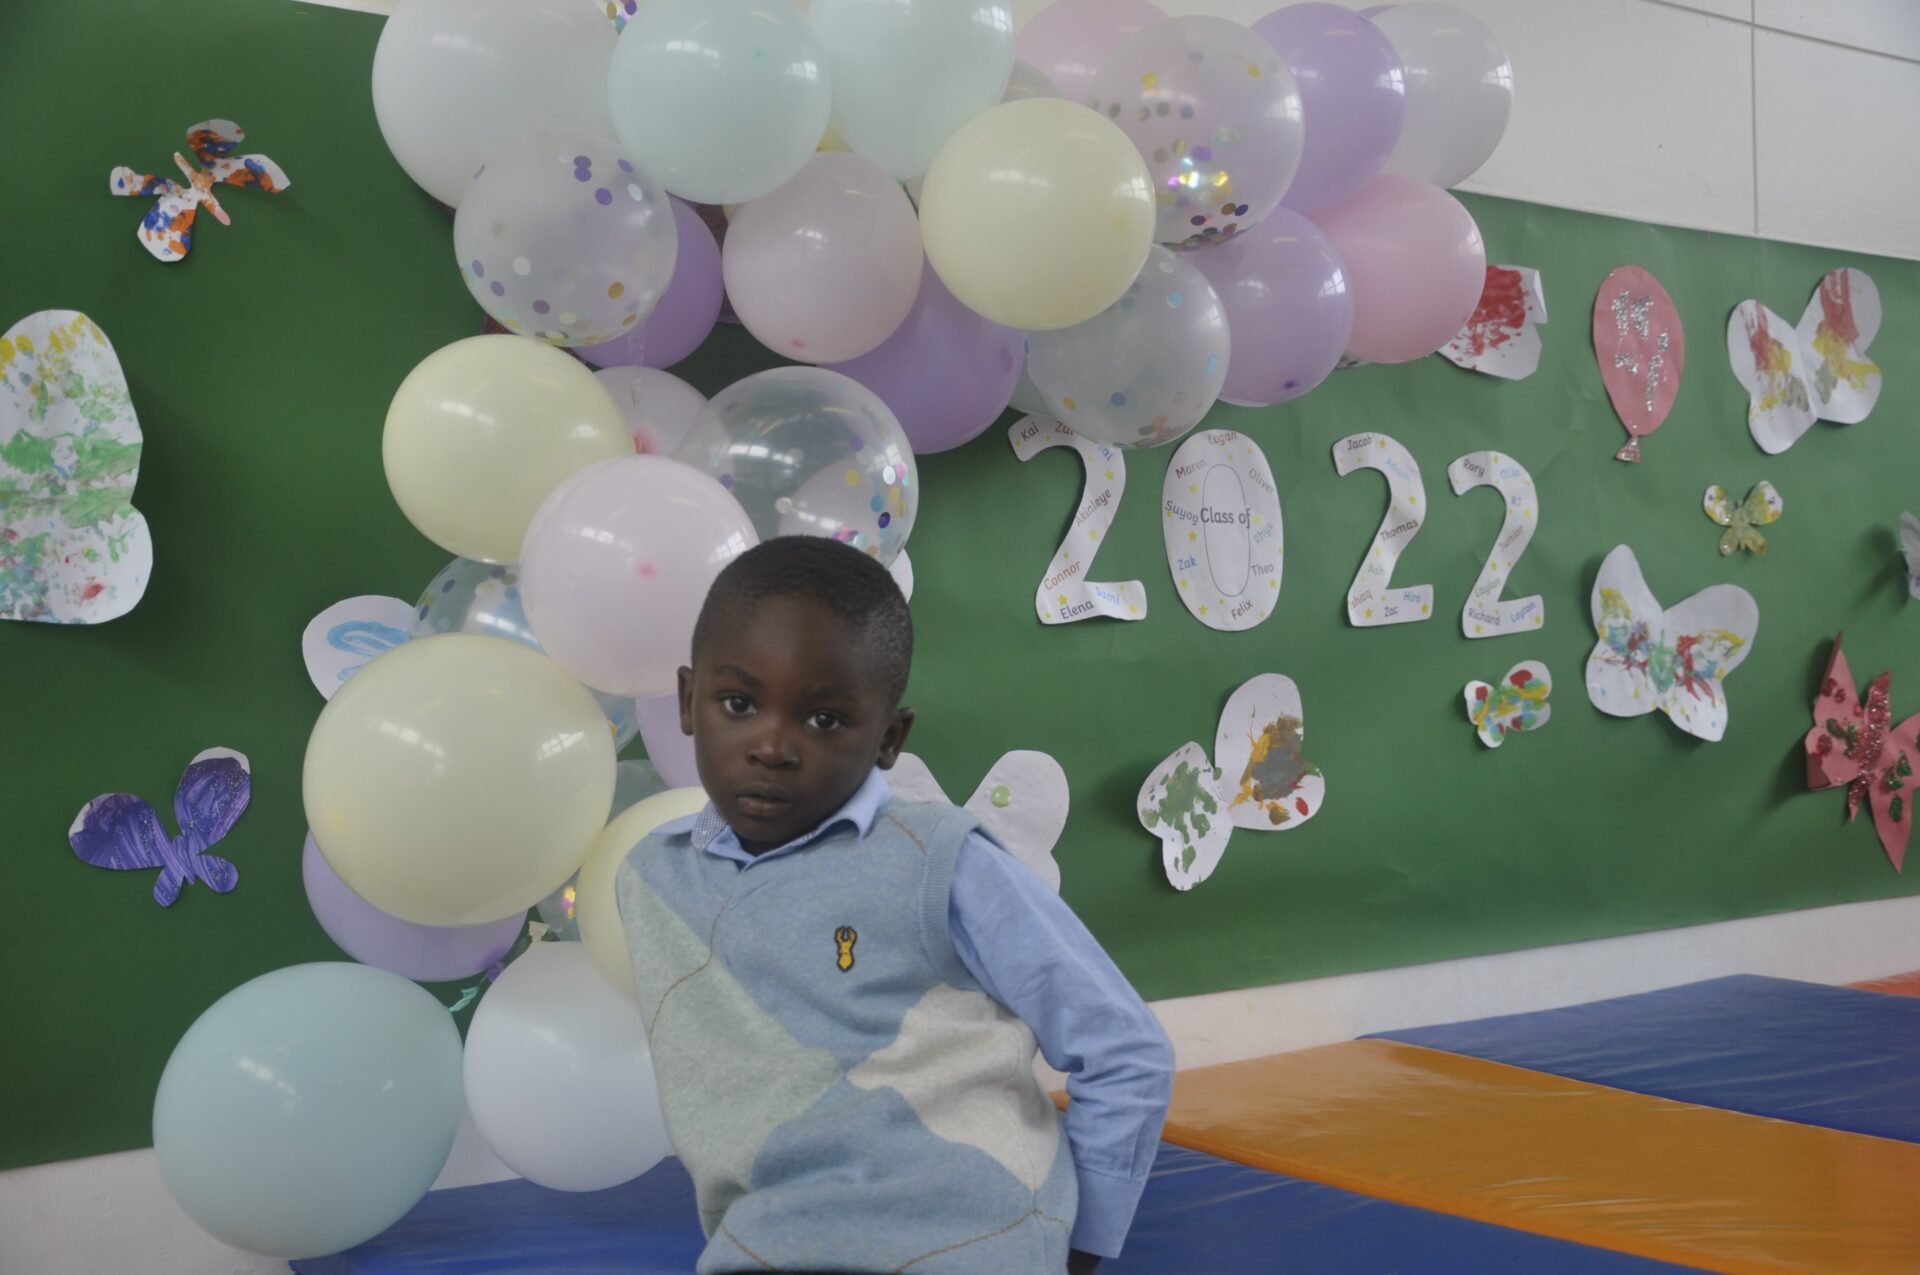 End of Year Celebrations at Ashgrove Children’s Centre